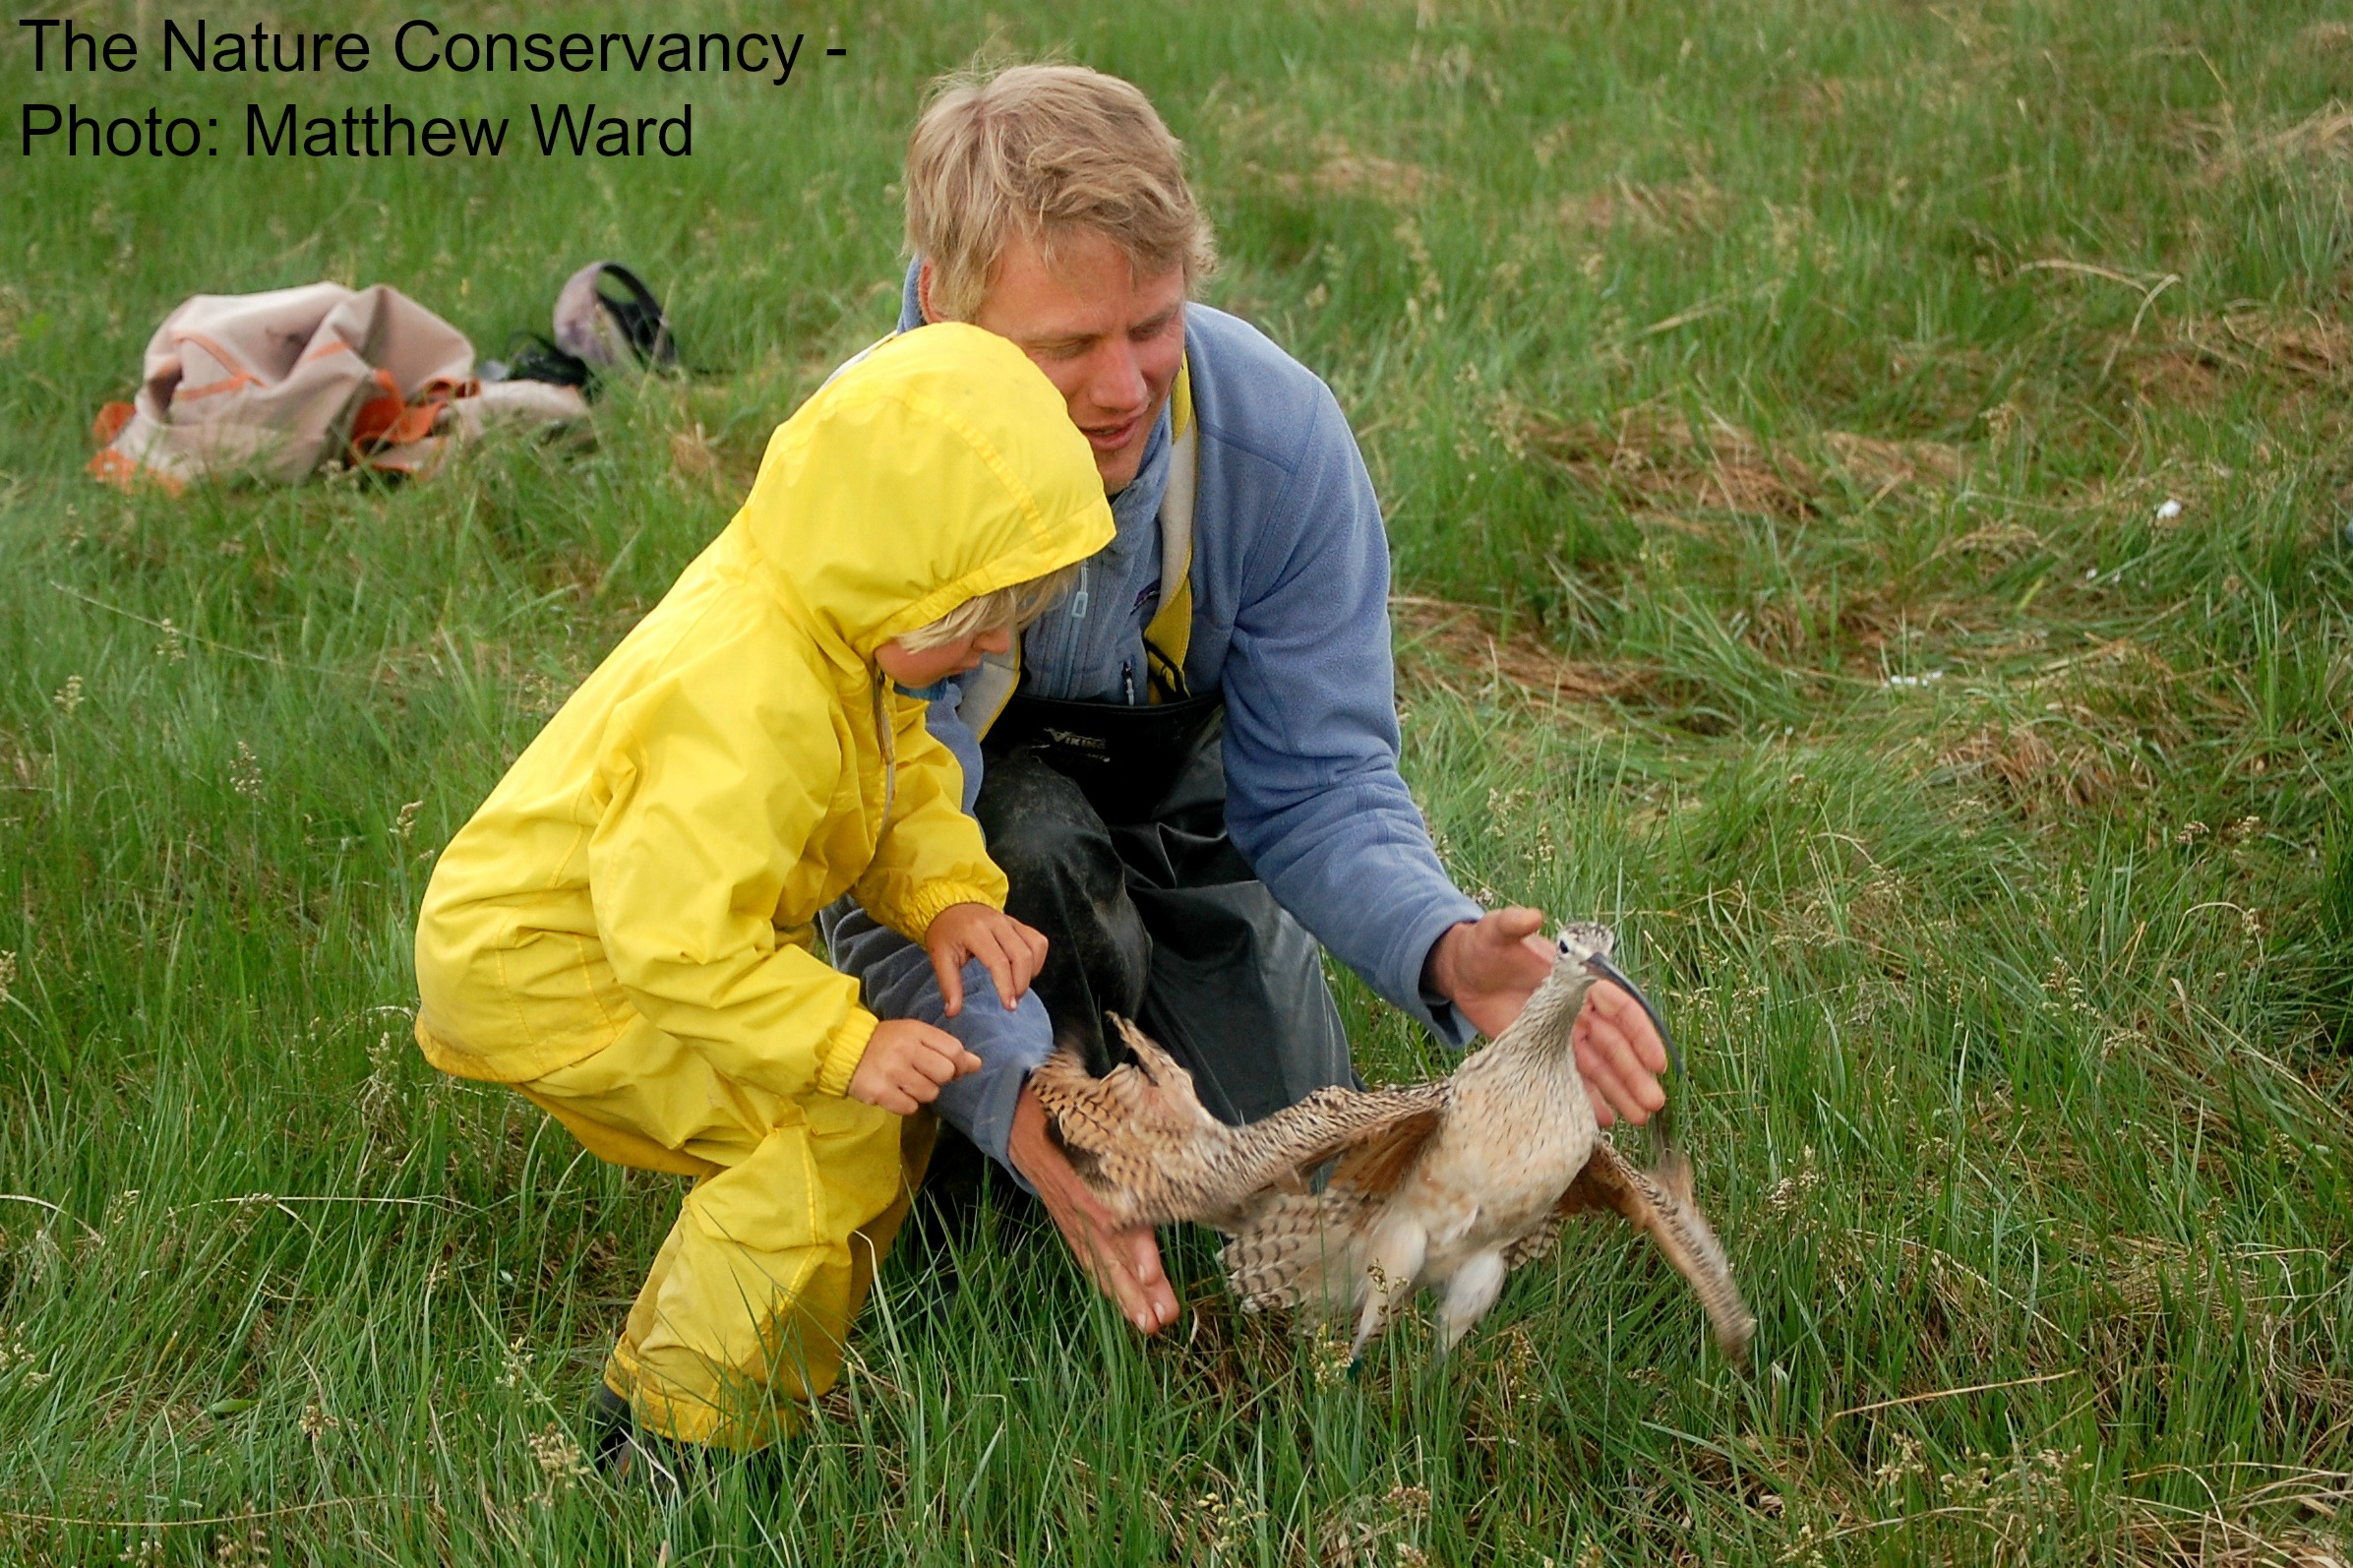 A child wearing a yellow raincoat and a man with blond hair kneel to pet a bird on green grass. Text overlay says "The Nature Conservancy - Photo: Matthew Ward."